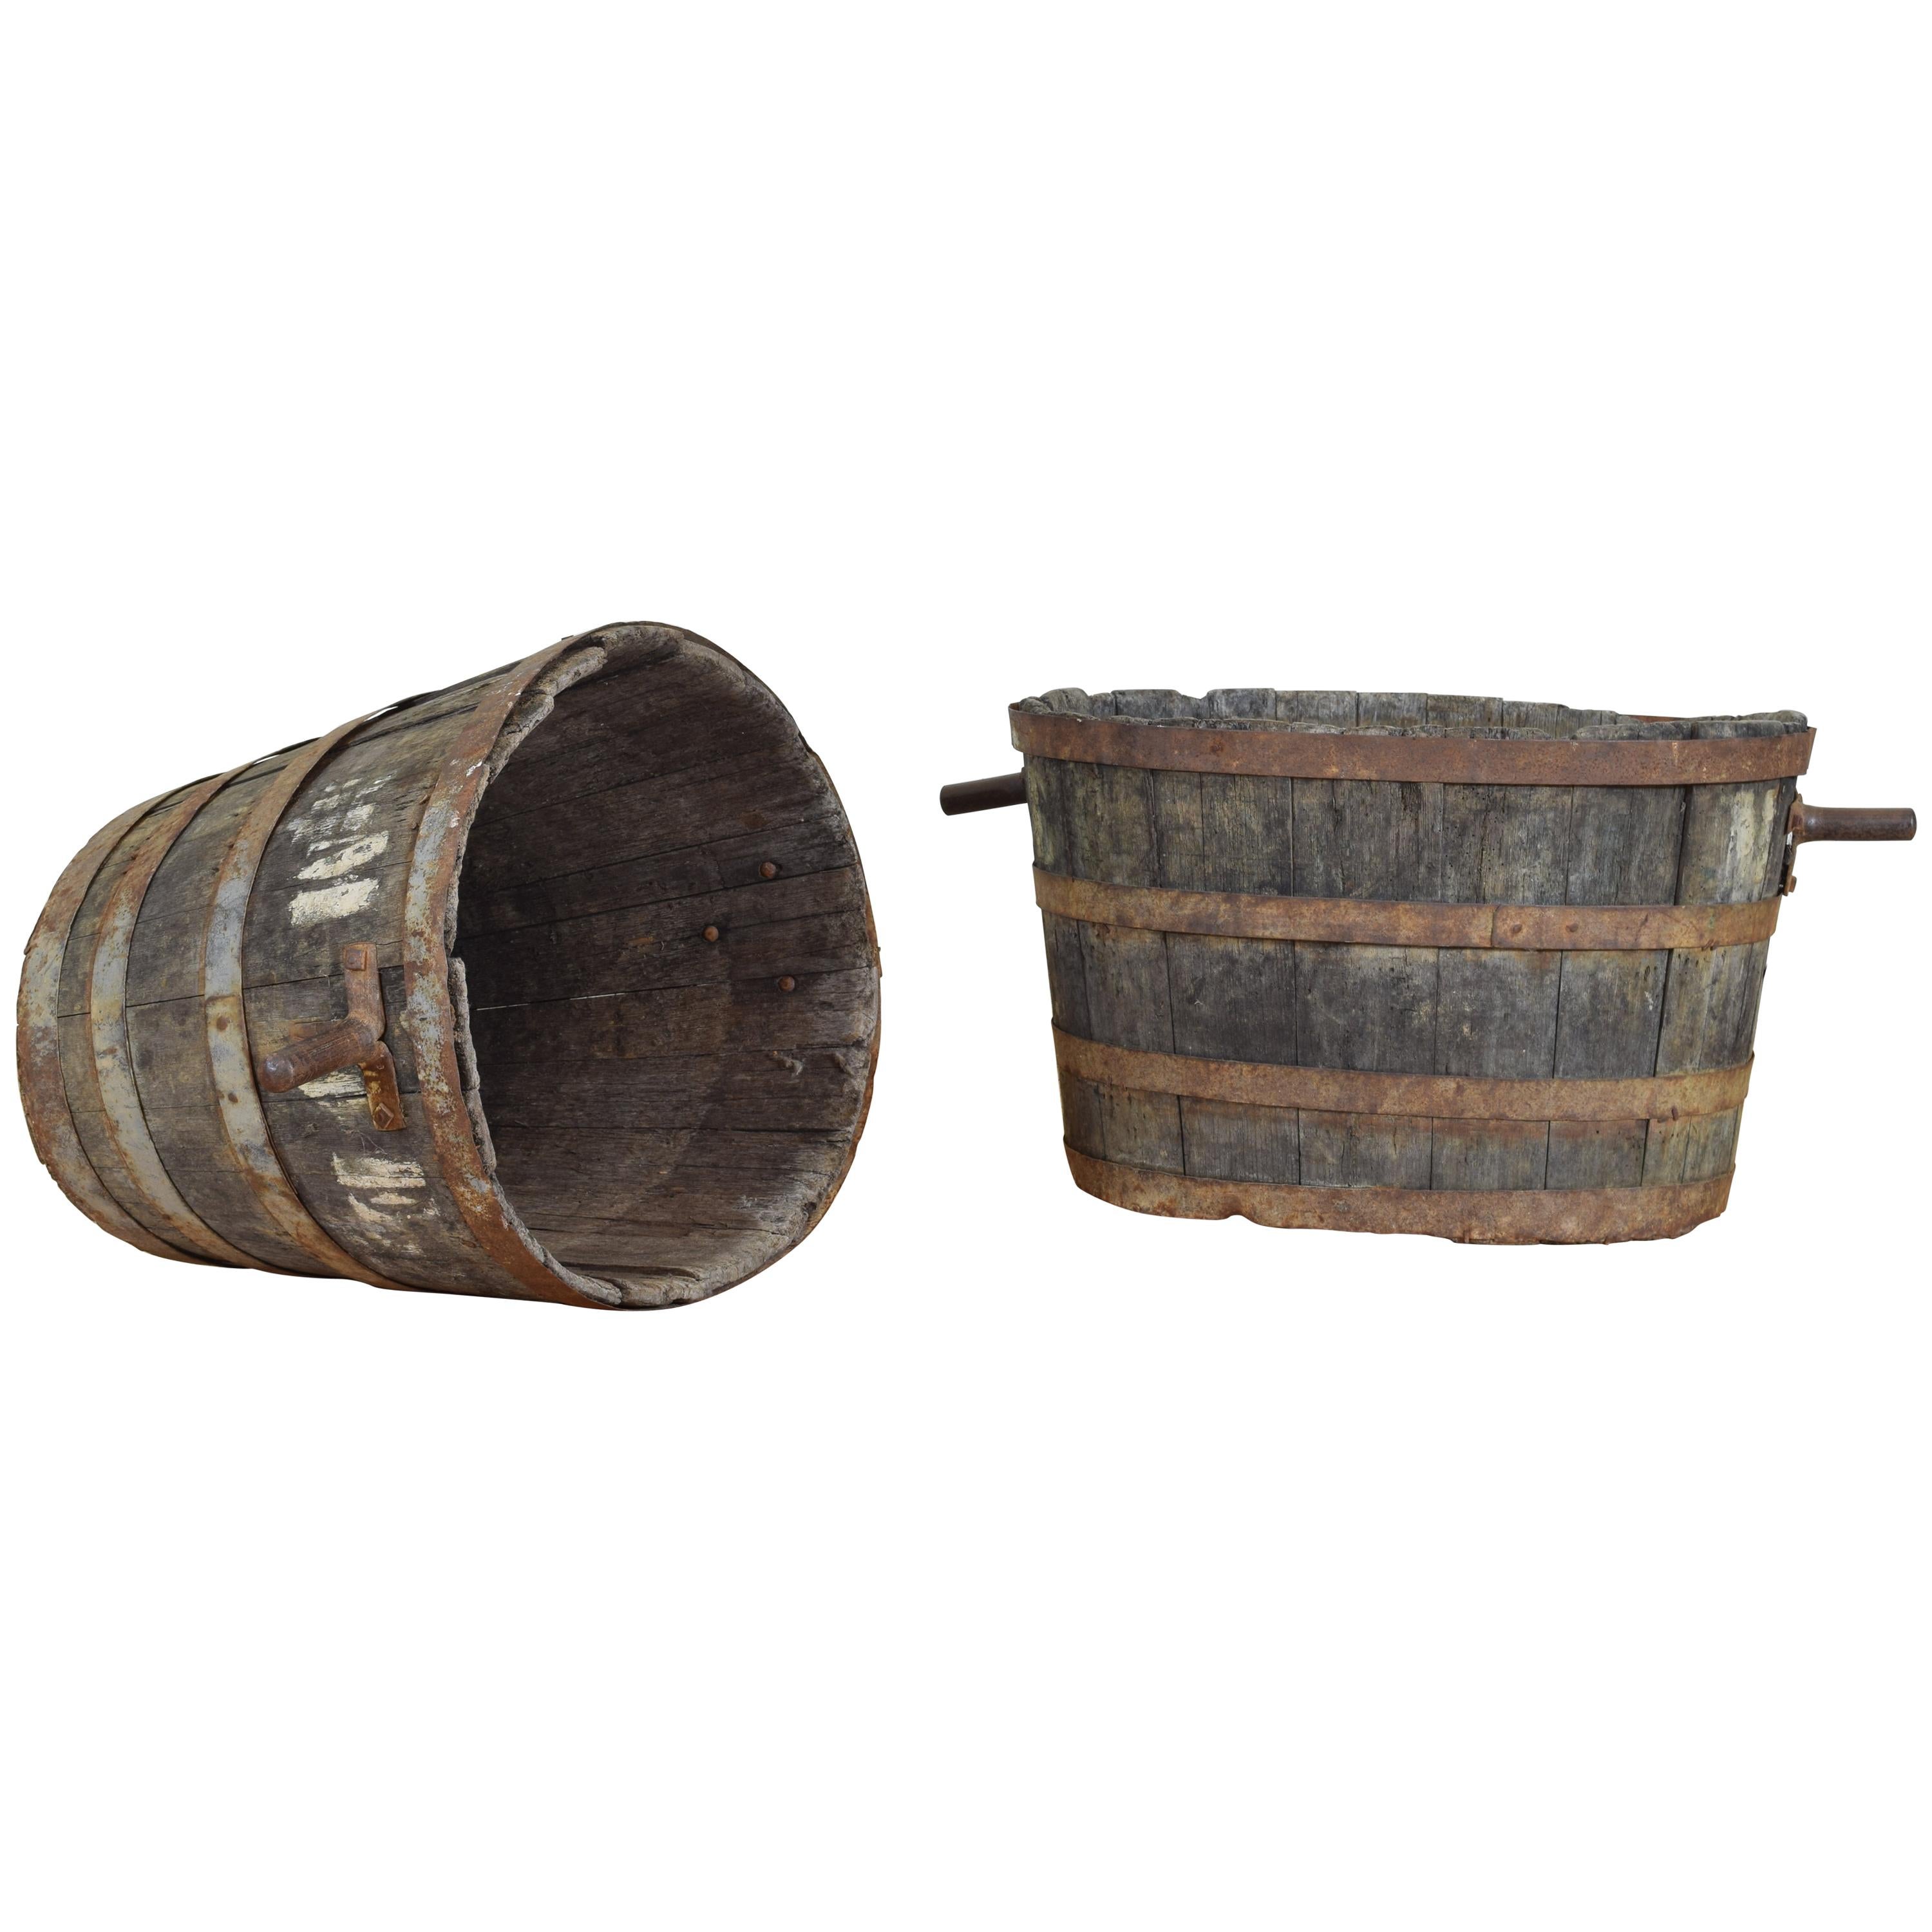 Pair of French Grape Buckets with Metal Banding and Handles, Early 20th Century